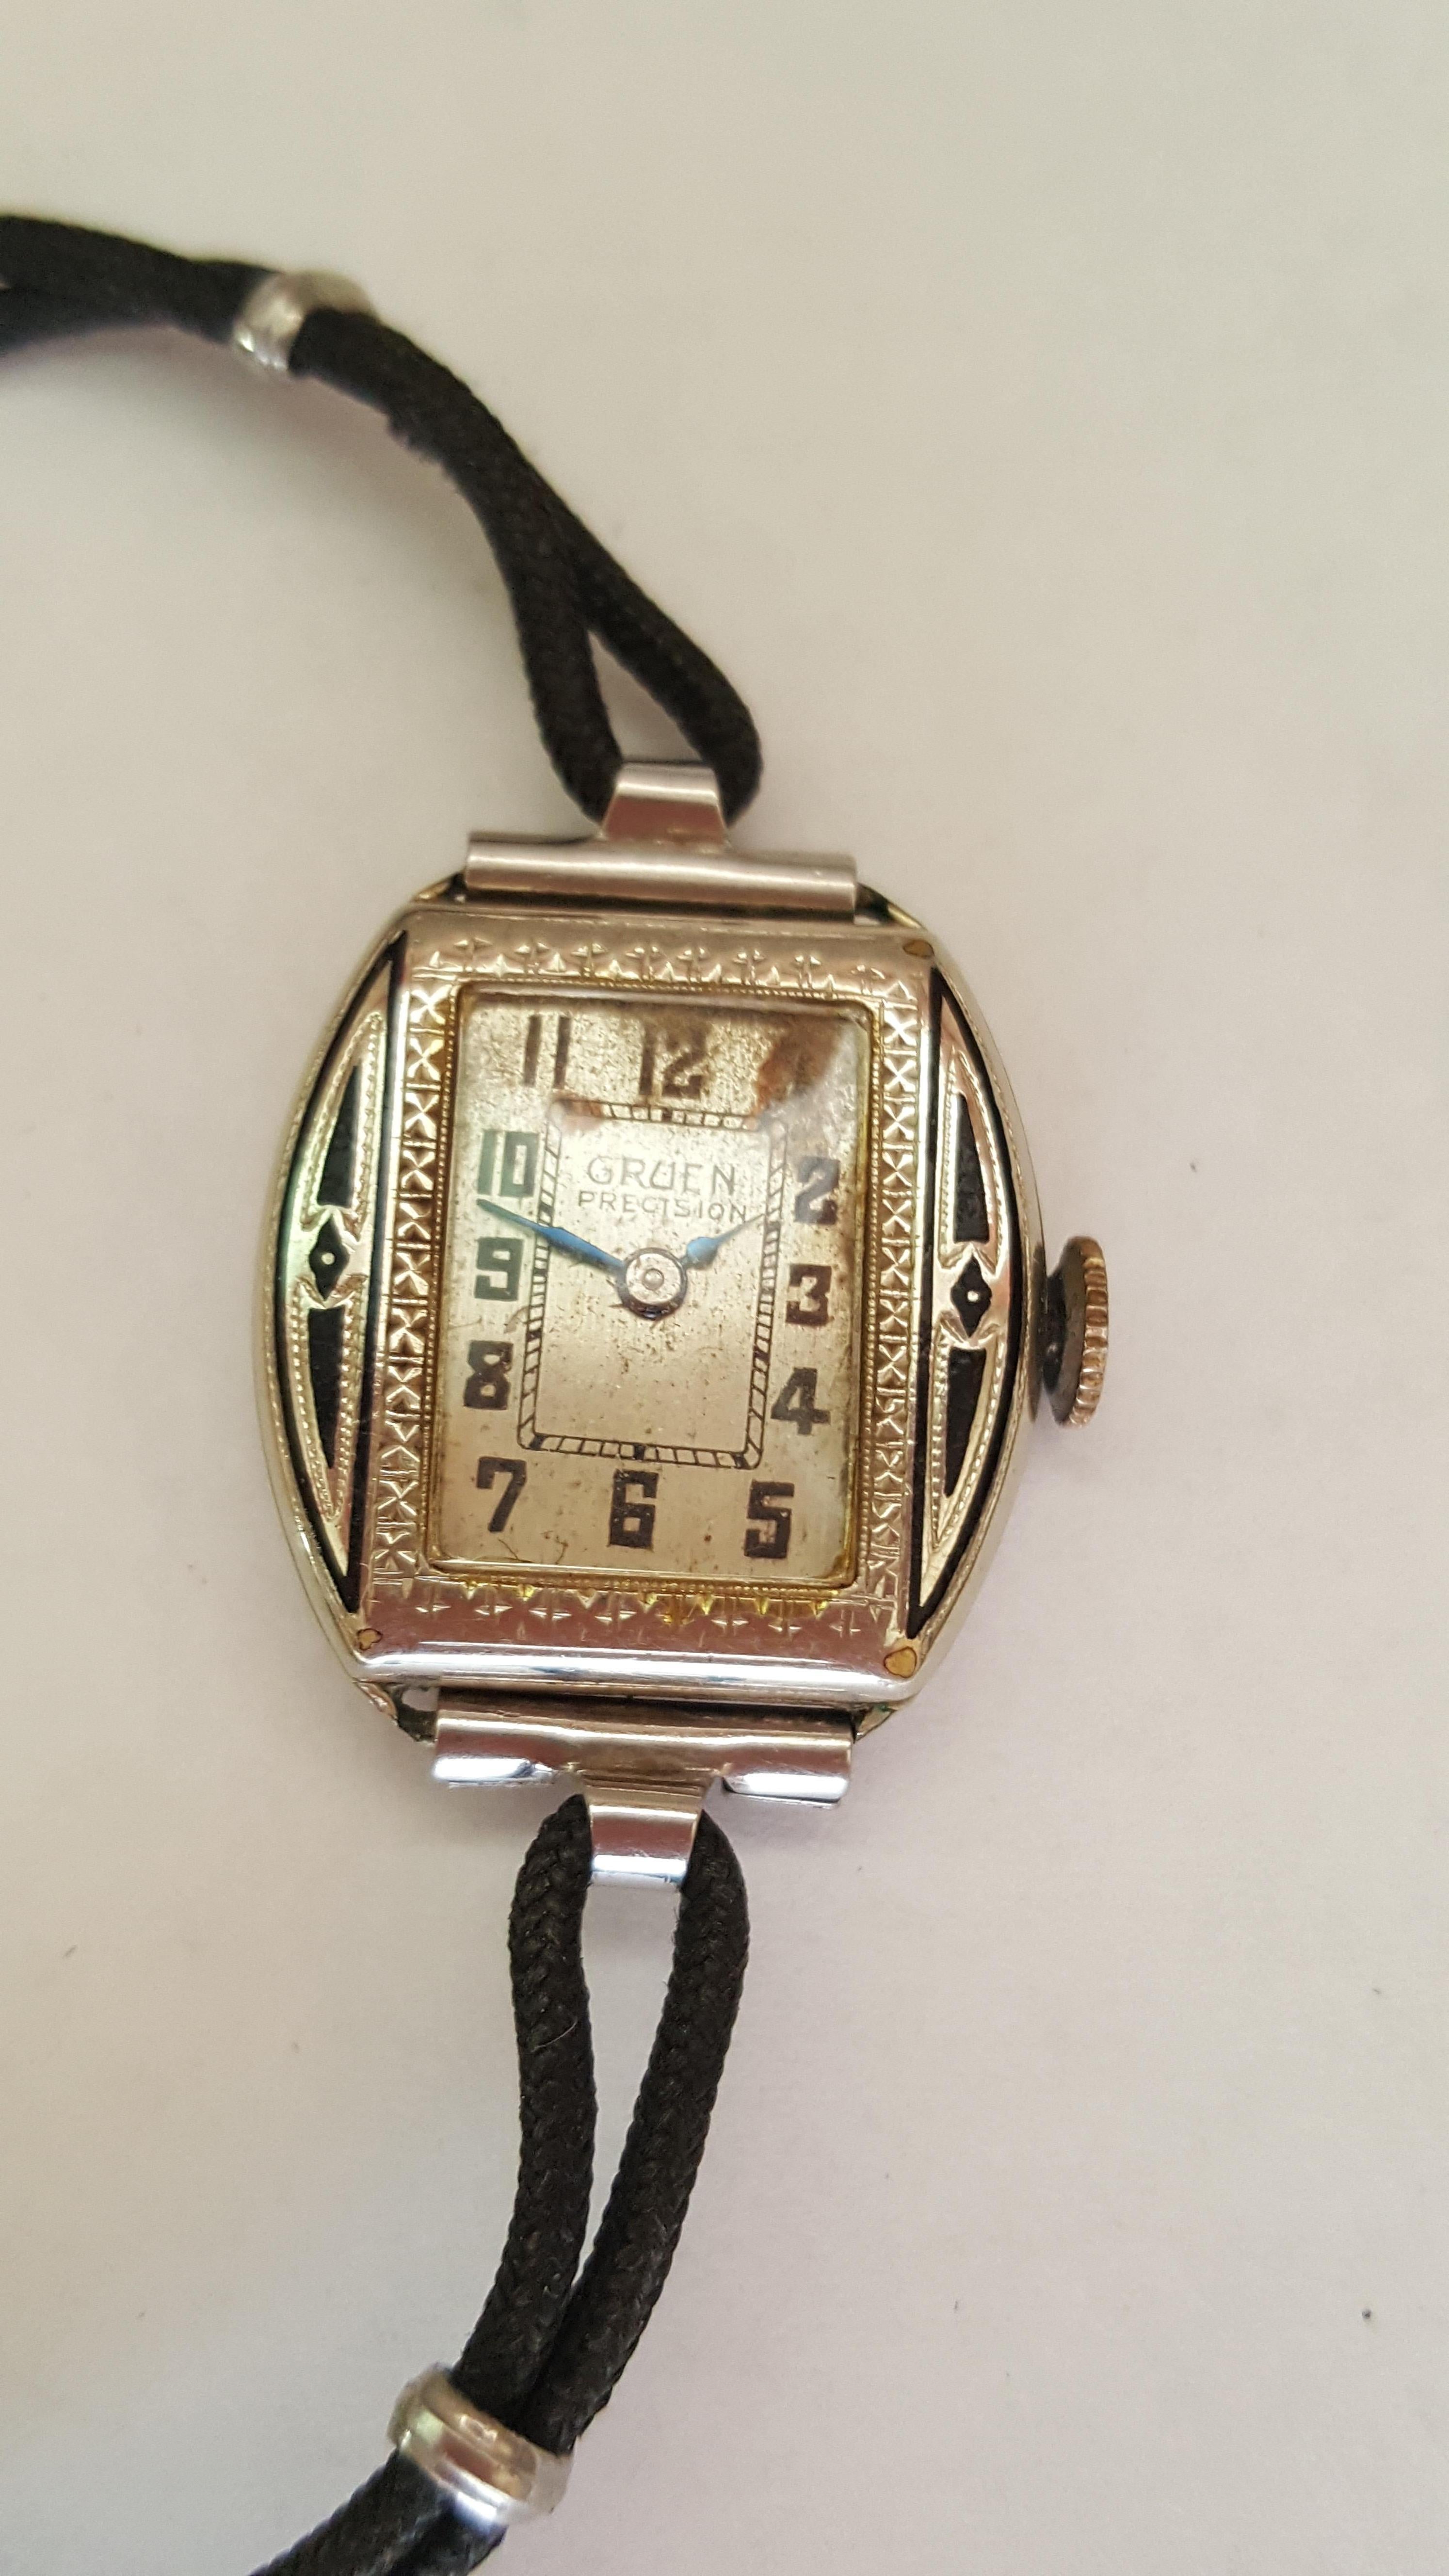 Vintage 1920's Gruen Precision ladies watch in fair condition.  This watch has detailed engraving and satin finish detail accented with black antiquing. This watch is perfect for a collector who'd likes to work on watches. The bracelet is a black